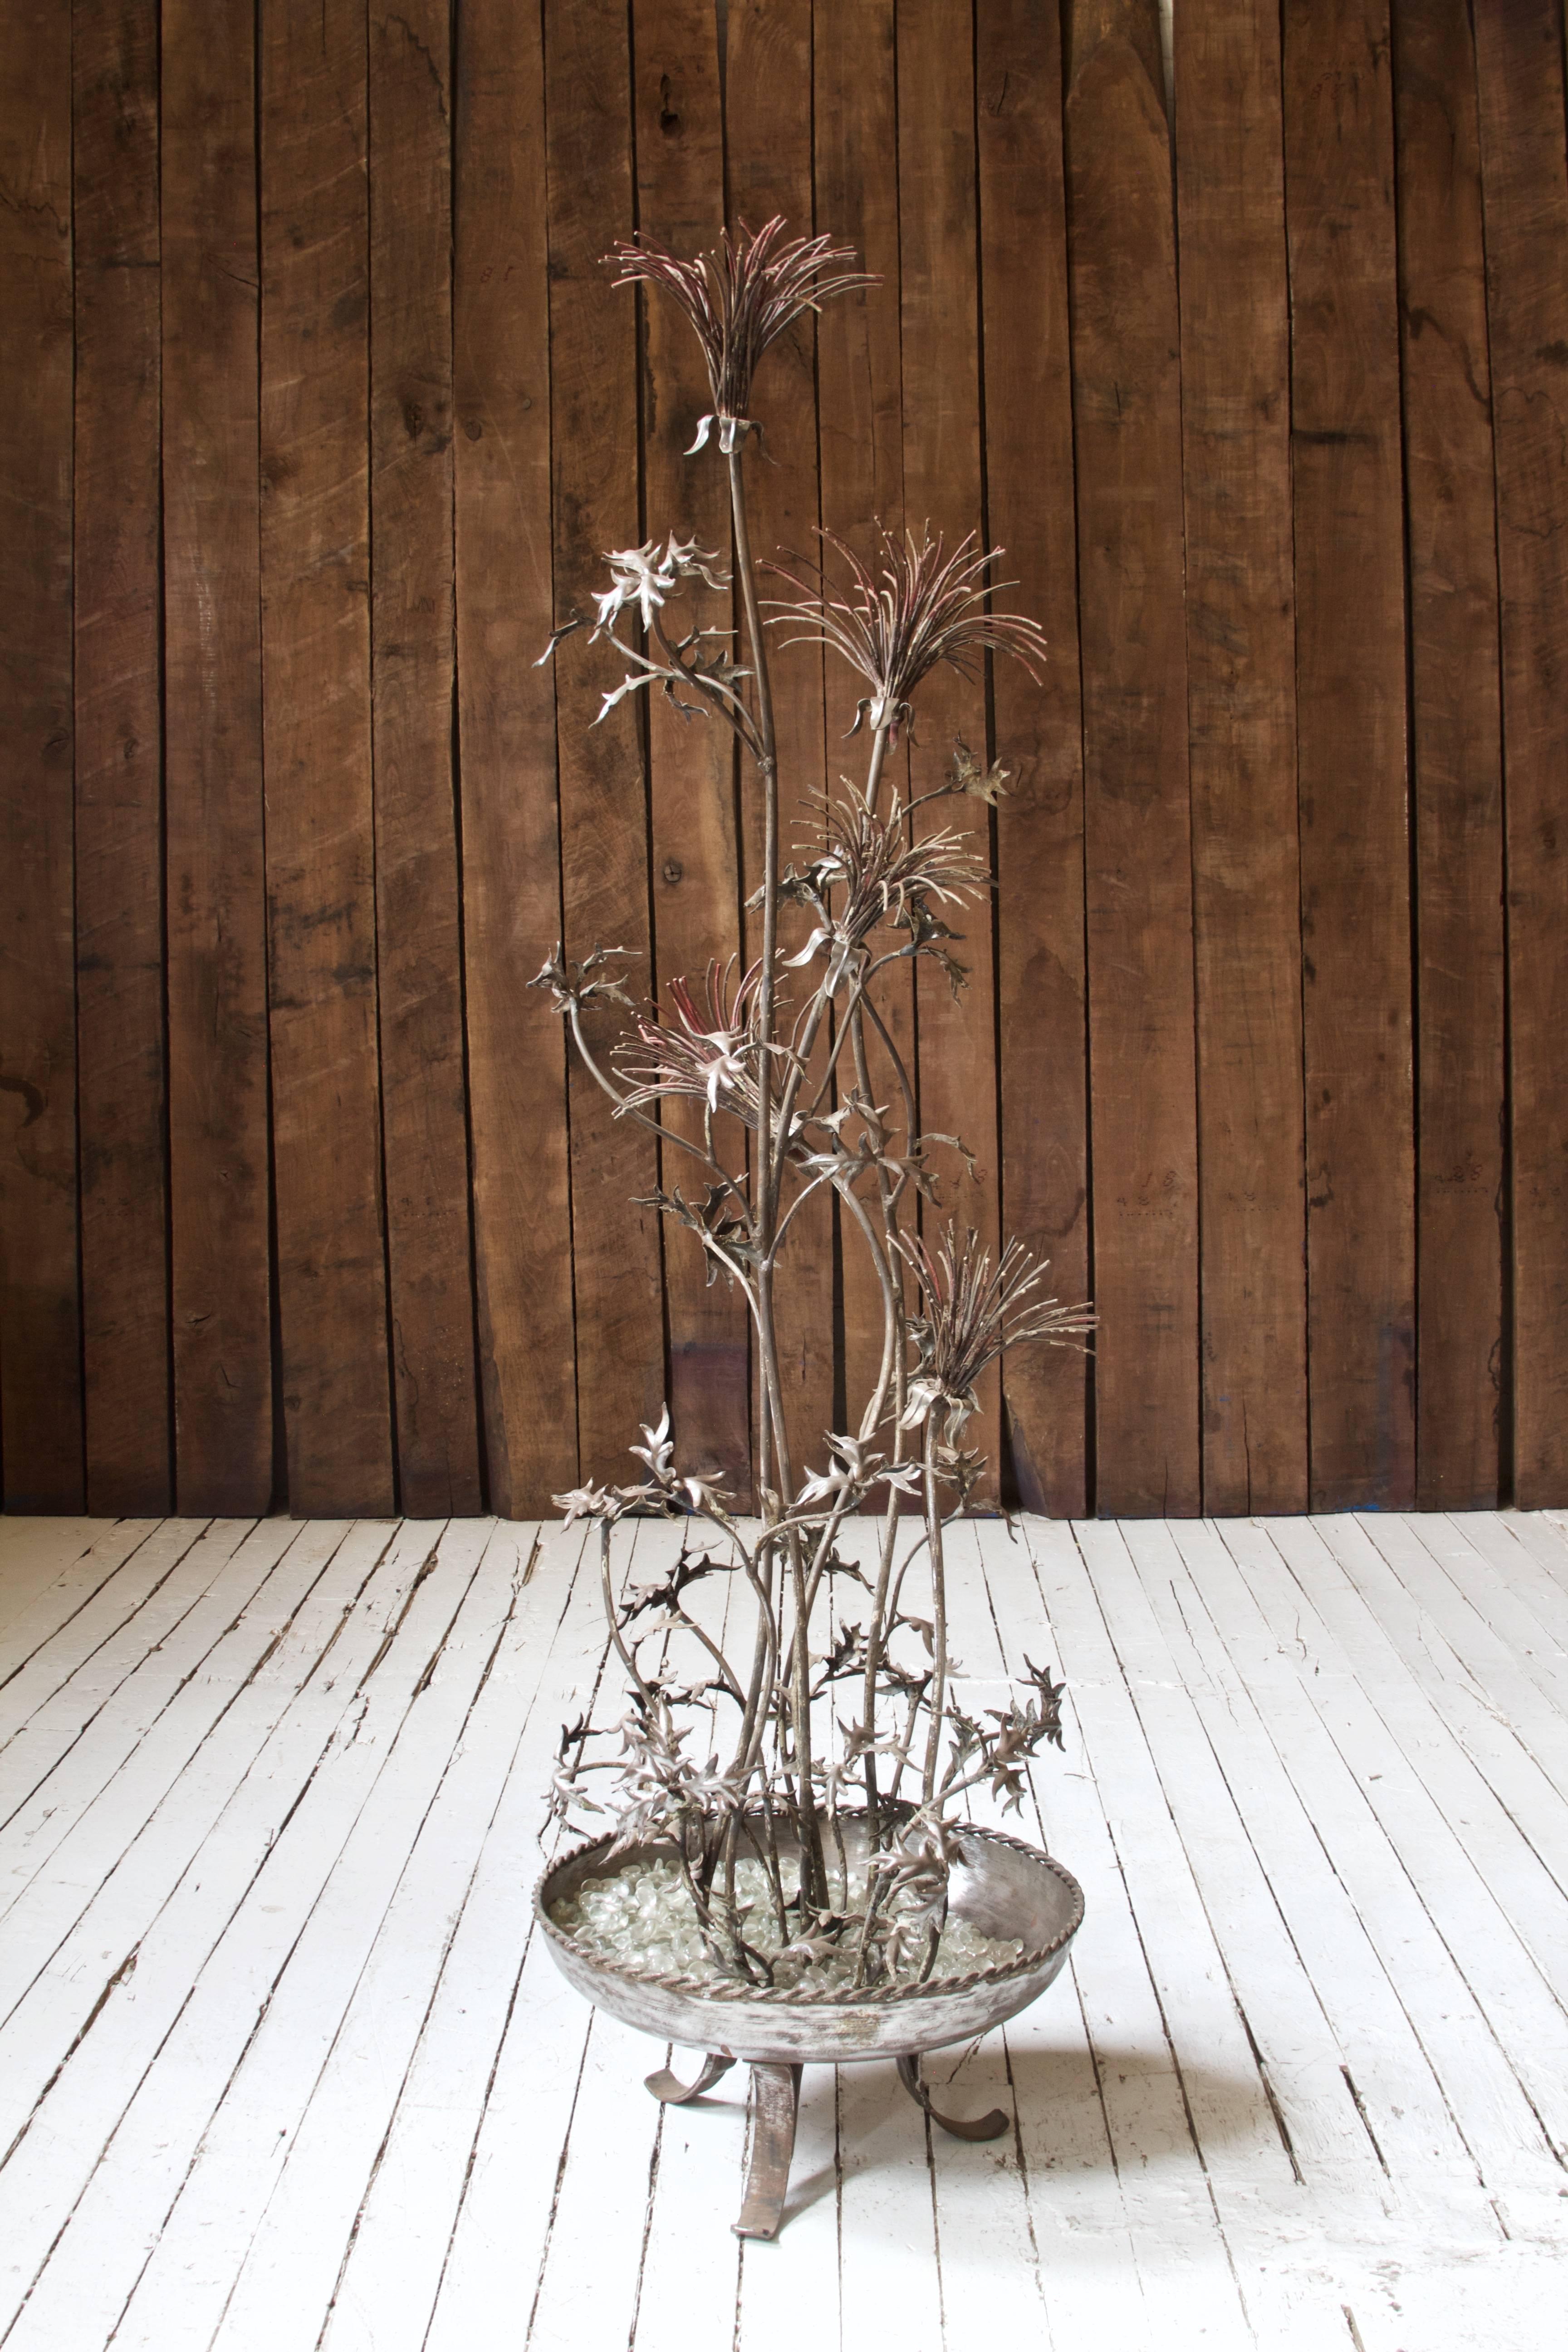 Exceptional artisan made metal French Renaissance style standing plant sculpture, 1940s. Original 'rouge' enamel tones remain on bronze; soft patina to metal throughout. Climbing hand-forged iron stems emerge from textured steel basin of